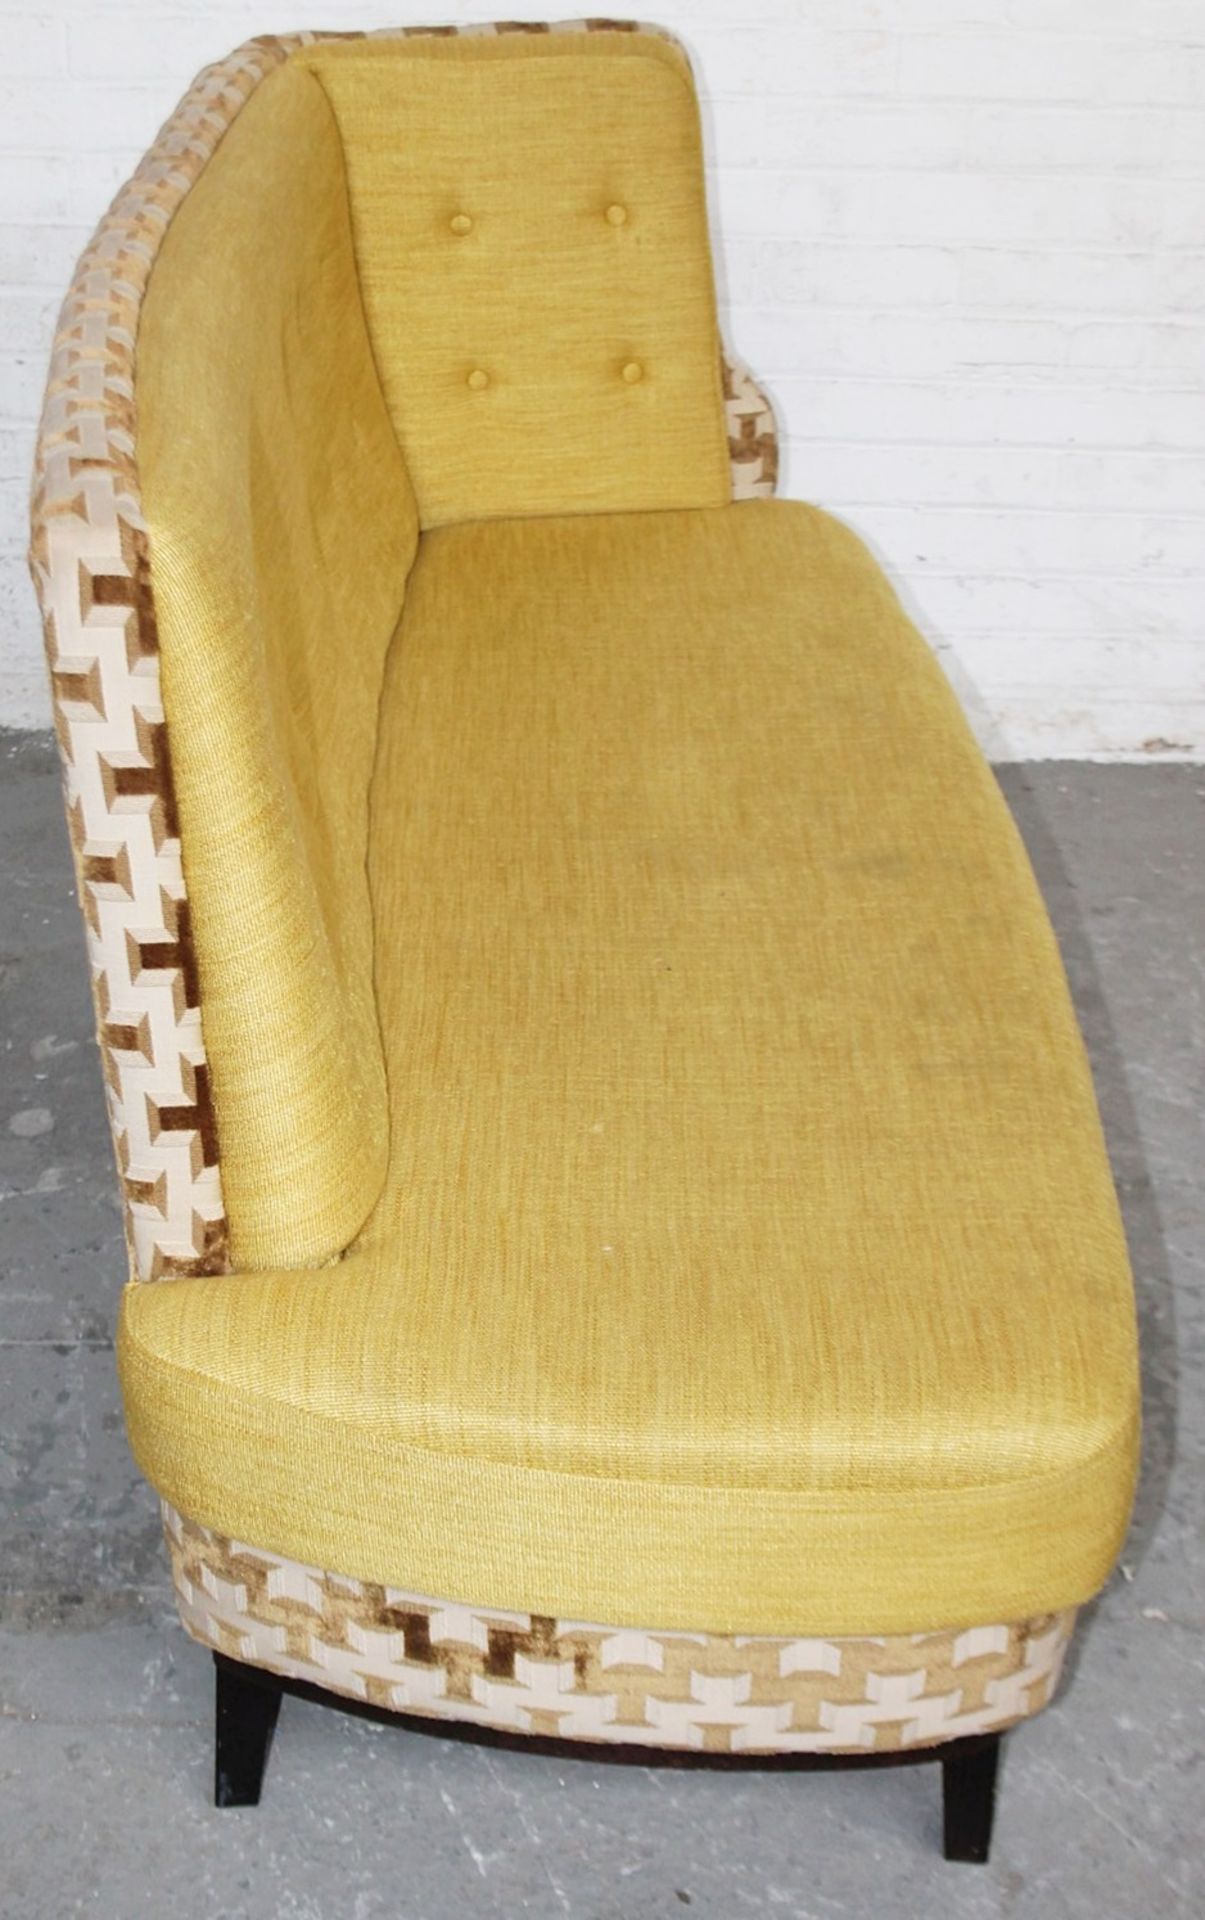 1 x Commercial Freestanding Right-Hand 2-Seater Bench, Upholstered In Premium Gold-Coloured Fabrics, - Image 4 of 9